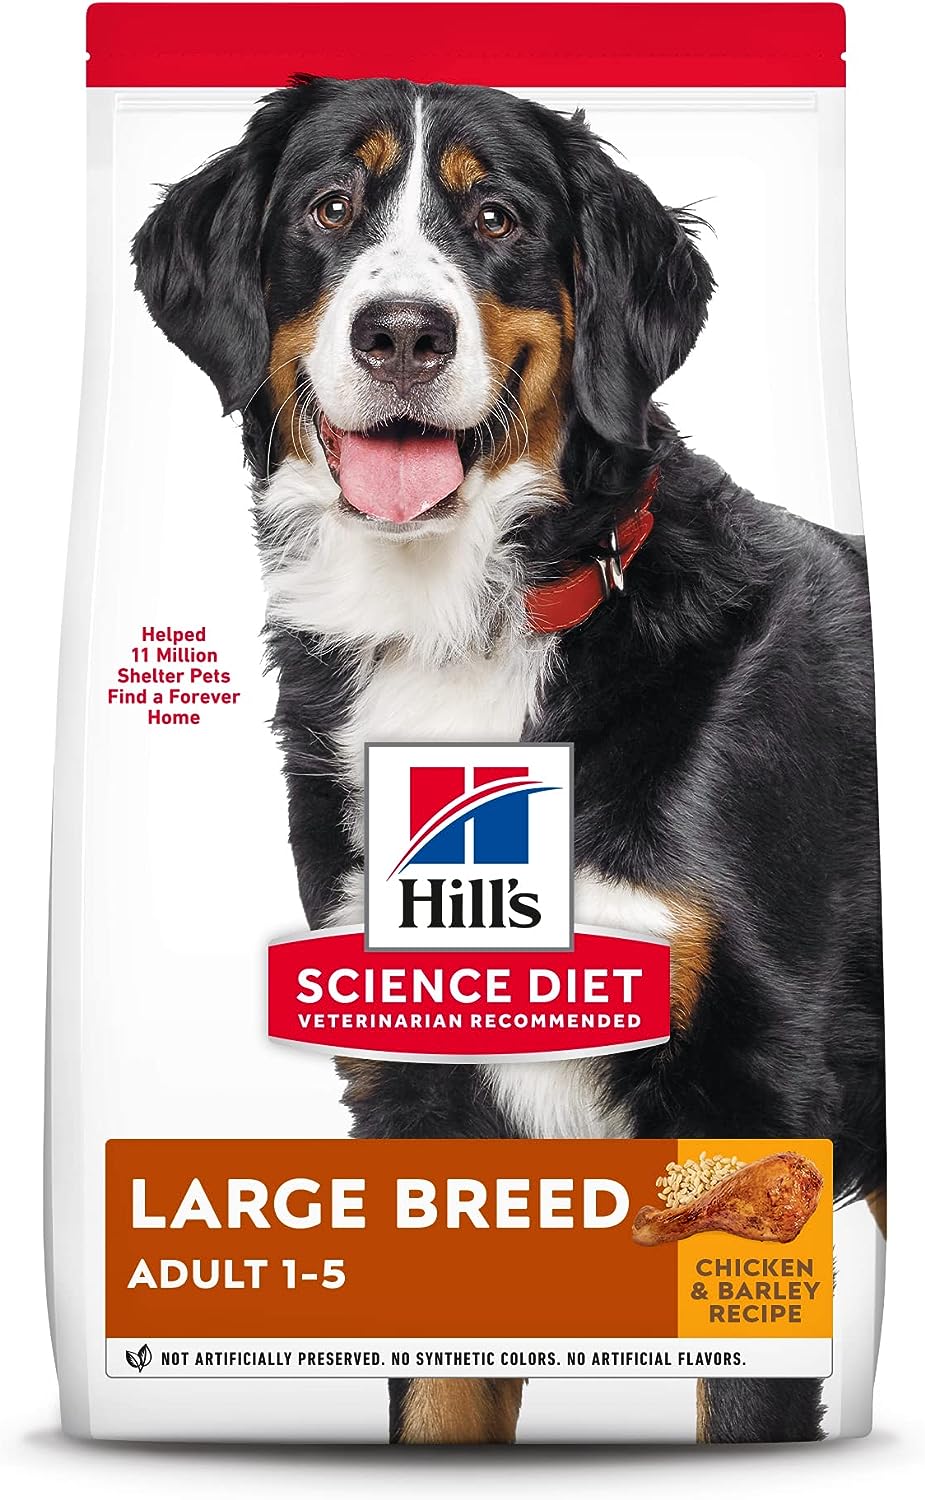 Hill’s Science Diet Adult Large Breed Chicken & Barley Recipe Dry Dog Food – Gallery Image 1